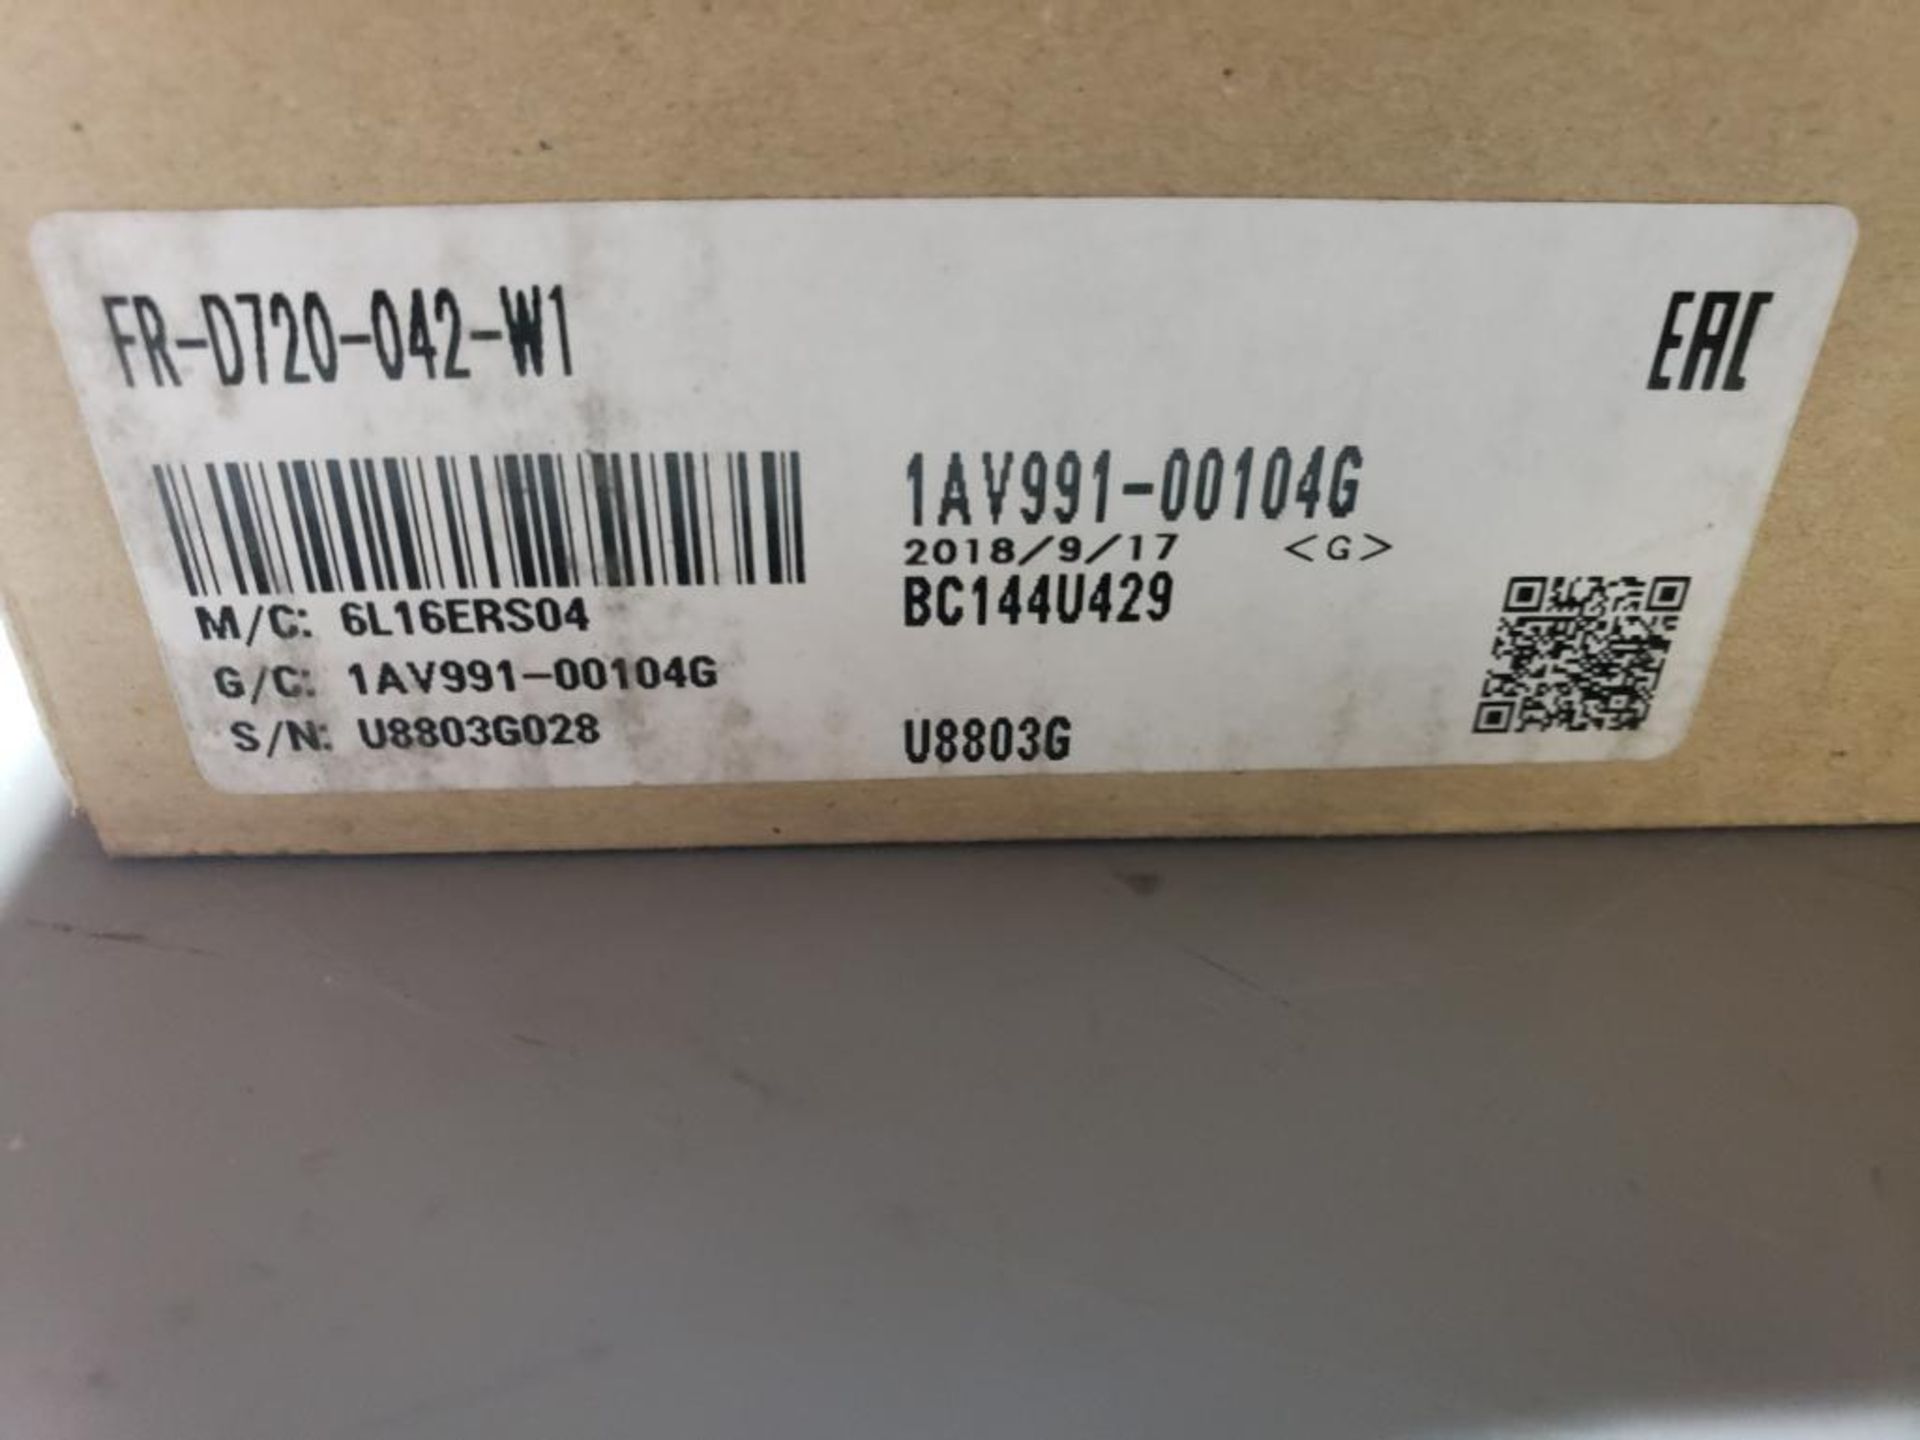 Mitsubishi inverter drive. Part number FR-D720-042-W1. New in box. - Image 2 of 4